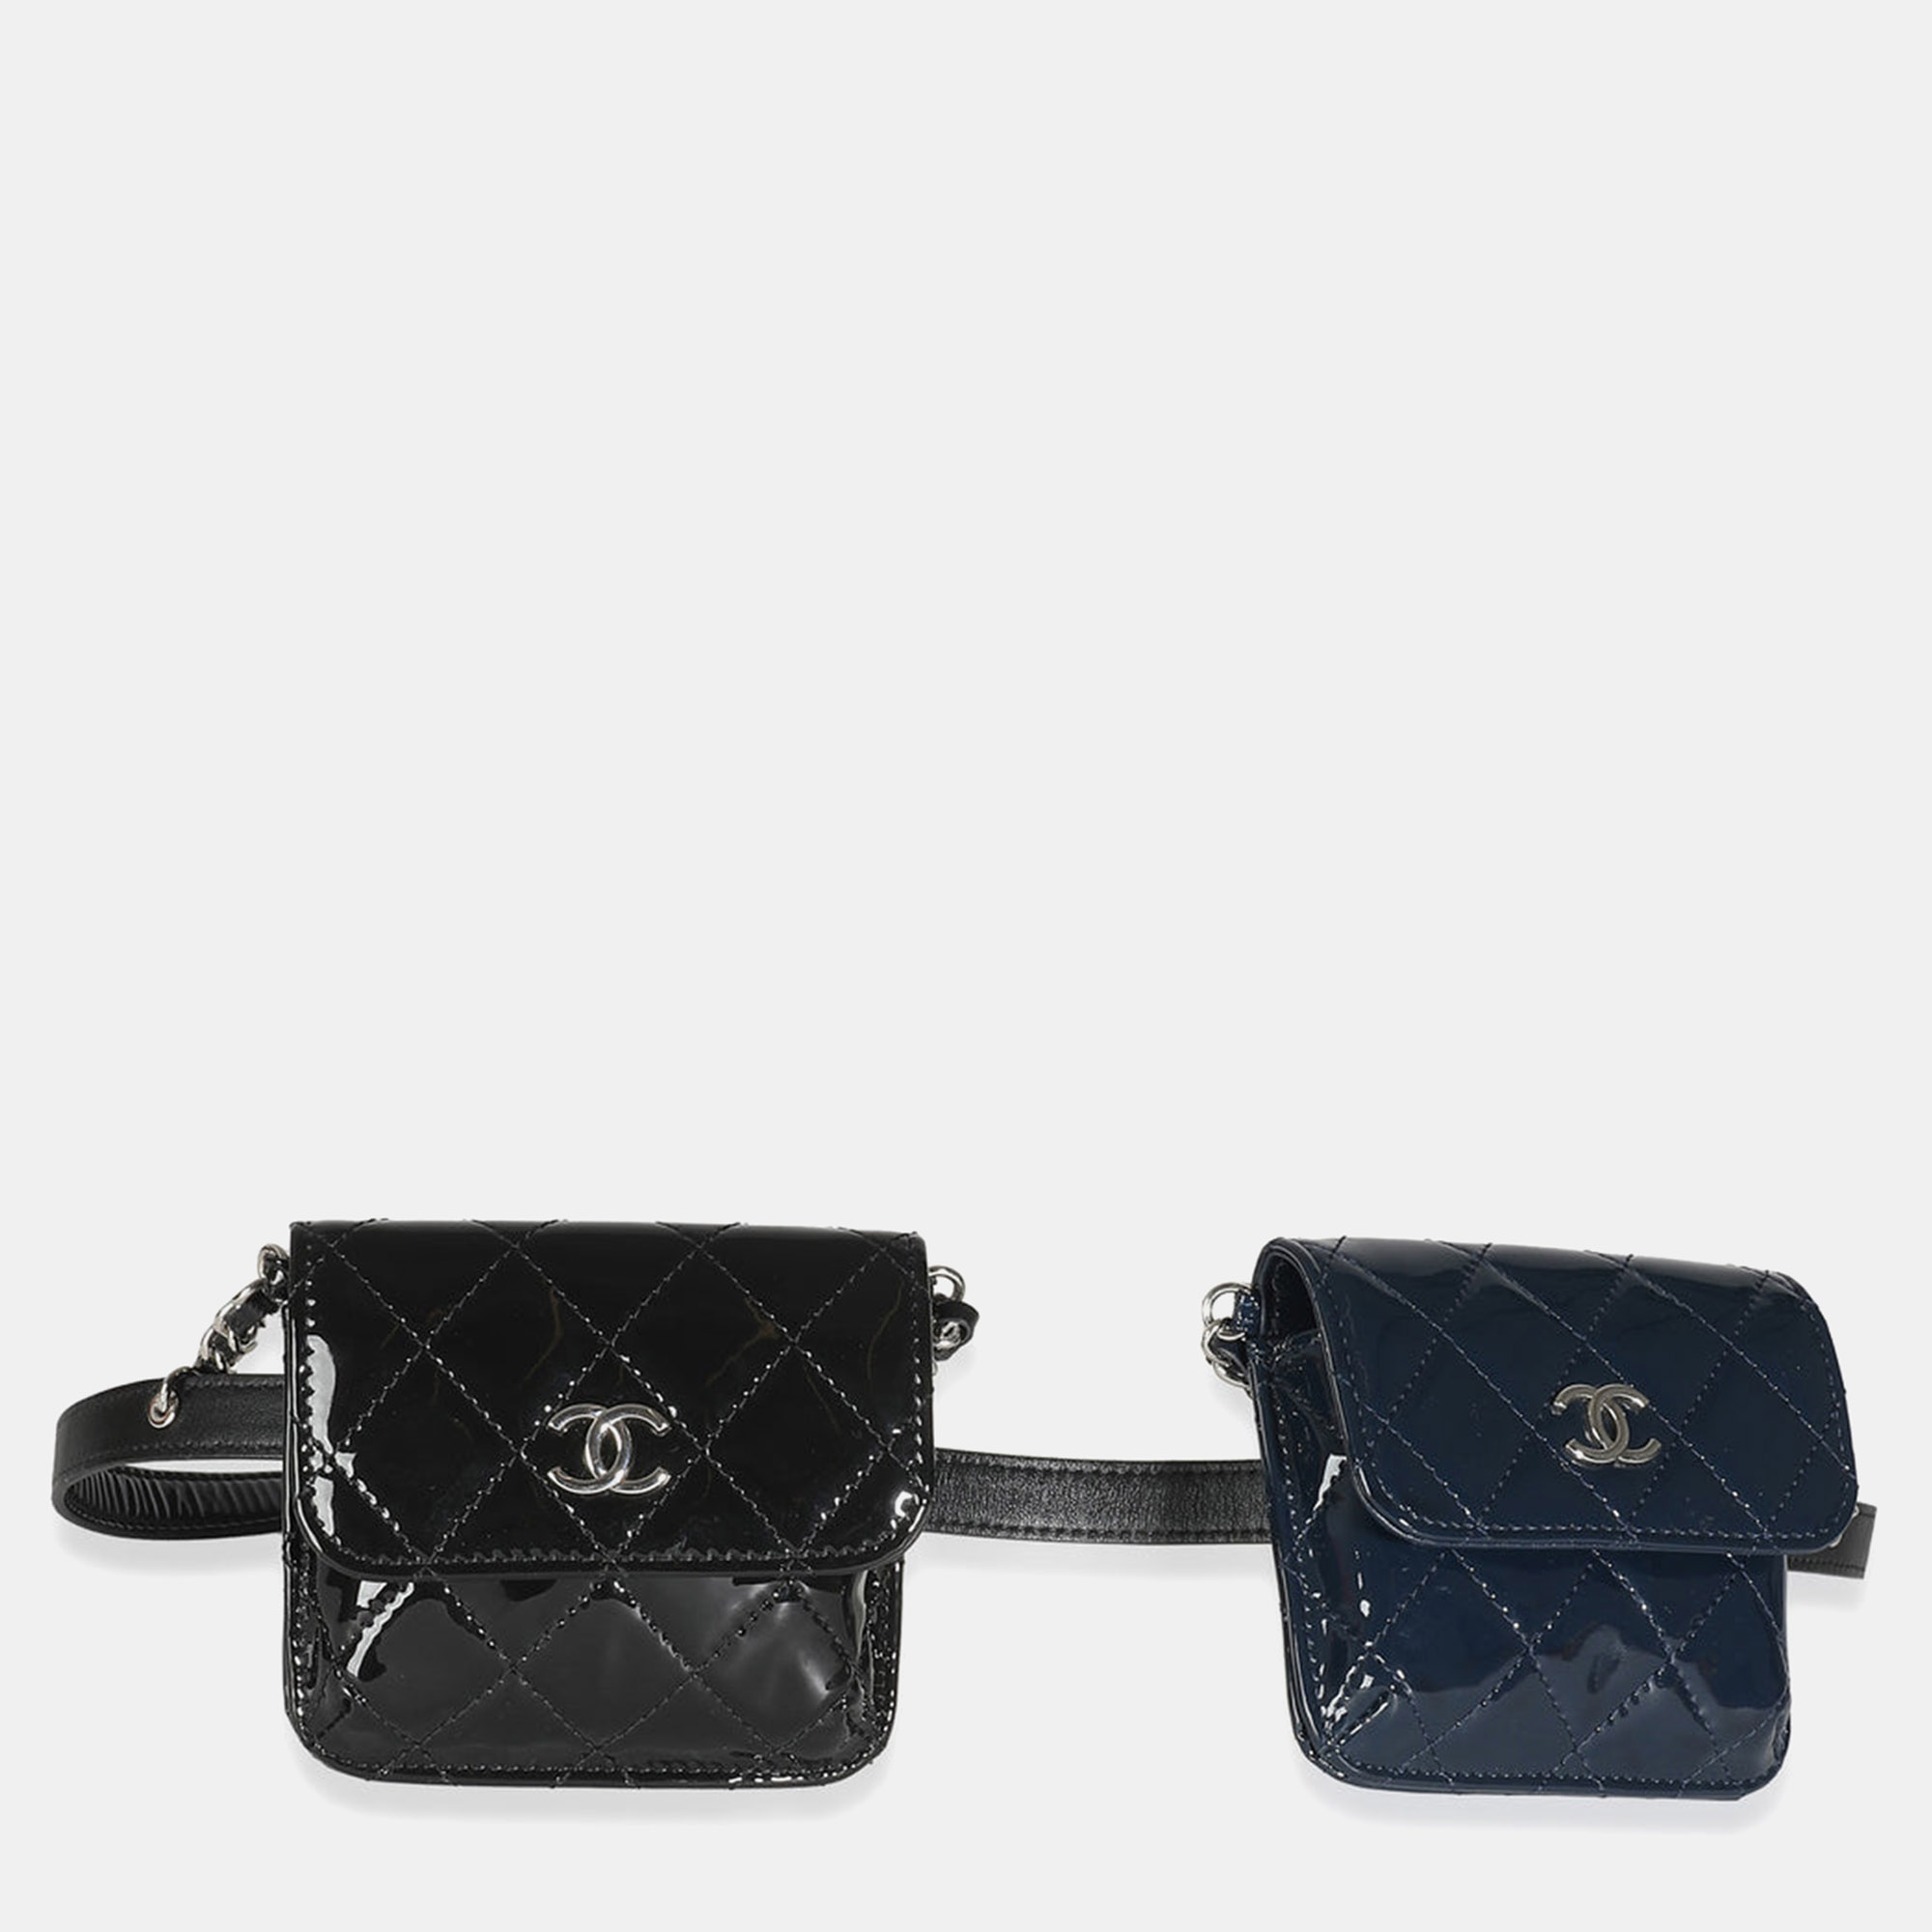 Chanel black navy quilted patent cc double chain mini waist bag